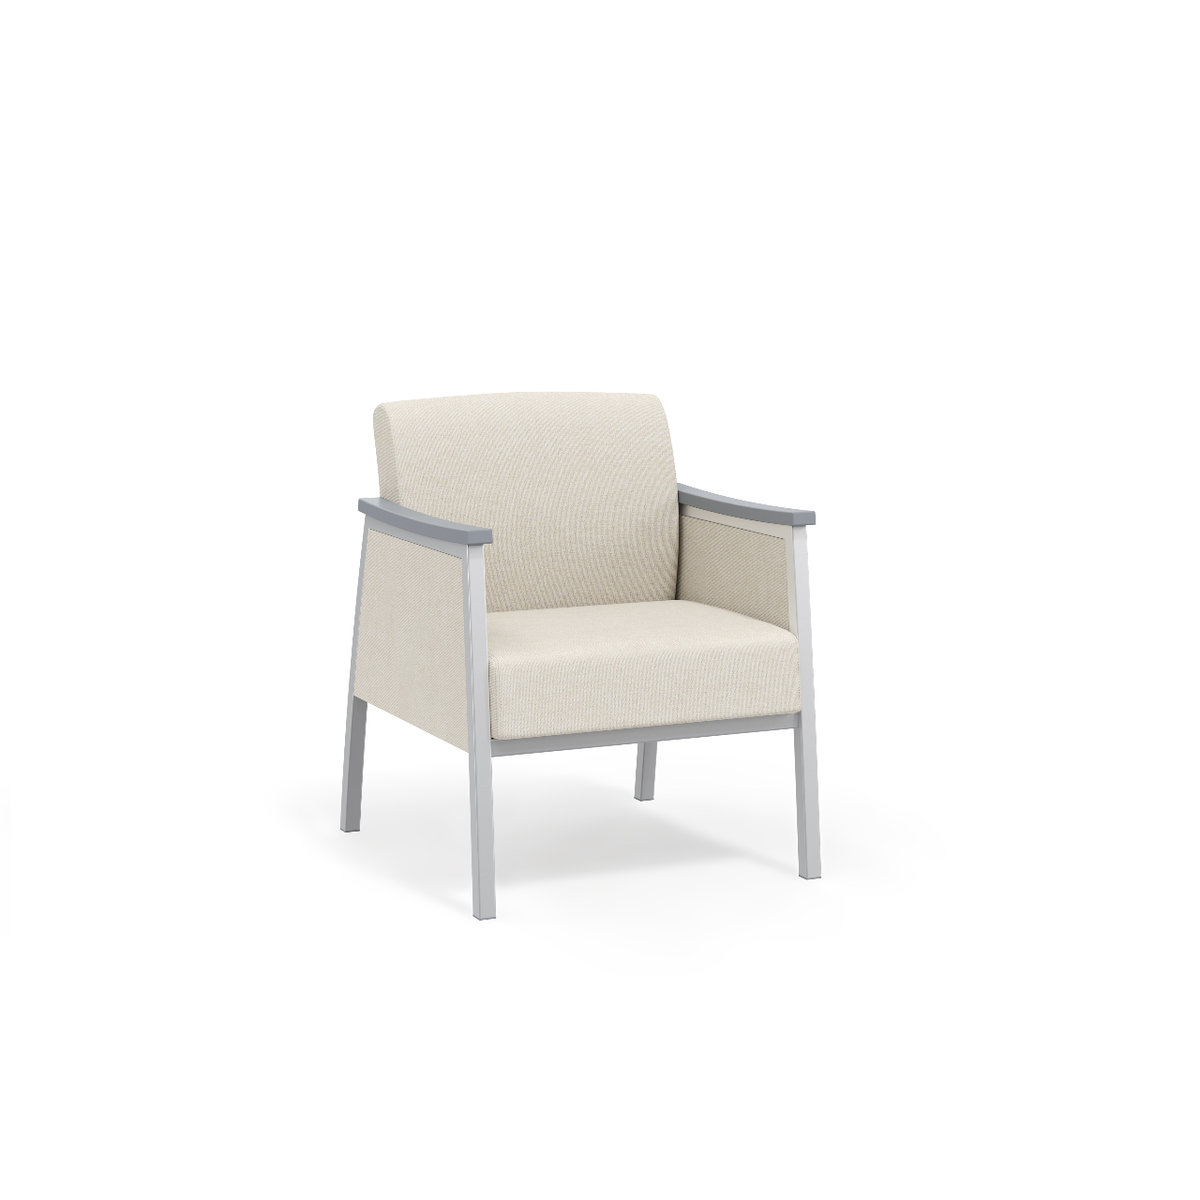 Single chair, closed arms Photo